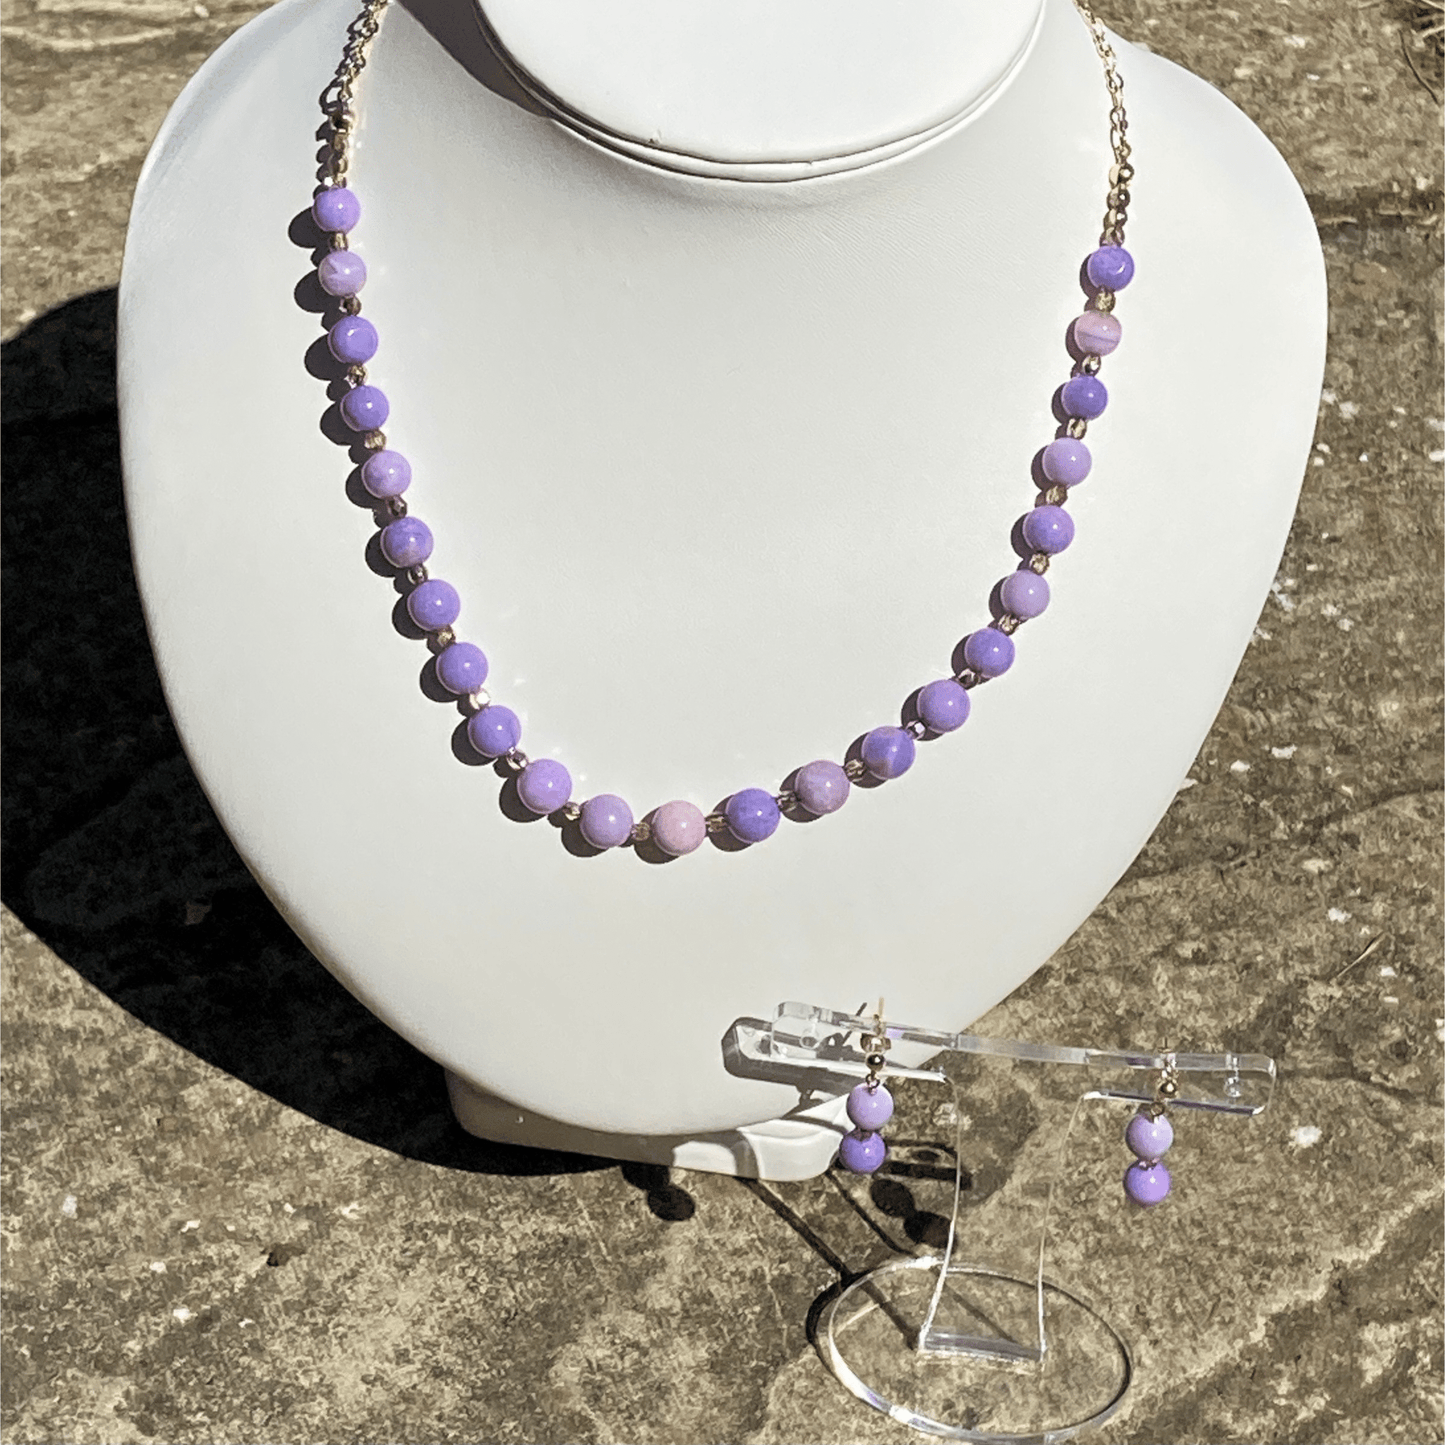 Handmade Lilac Peruvian Opal Gemstone And Rose Gold Plated Sterling Silver Necklace Set